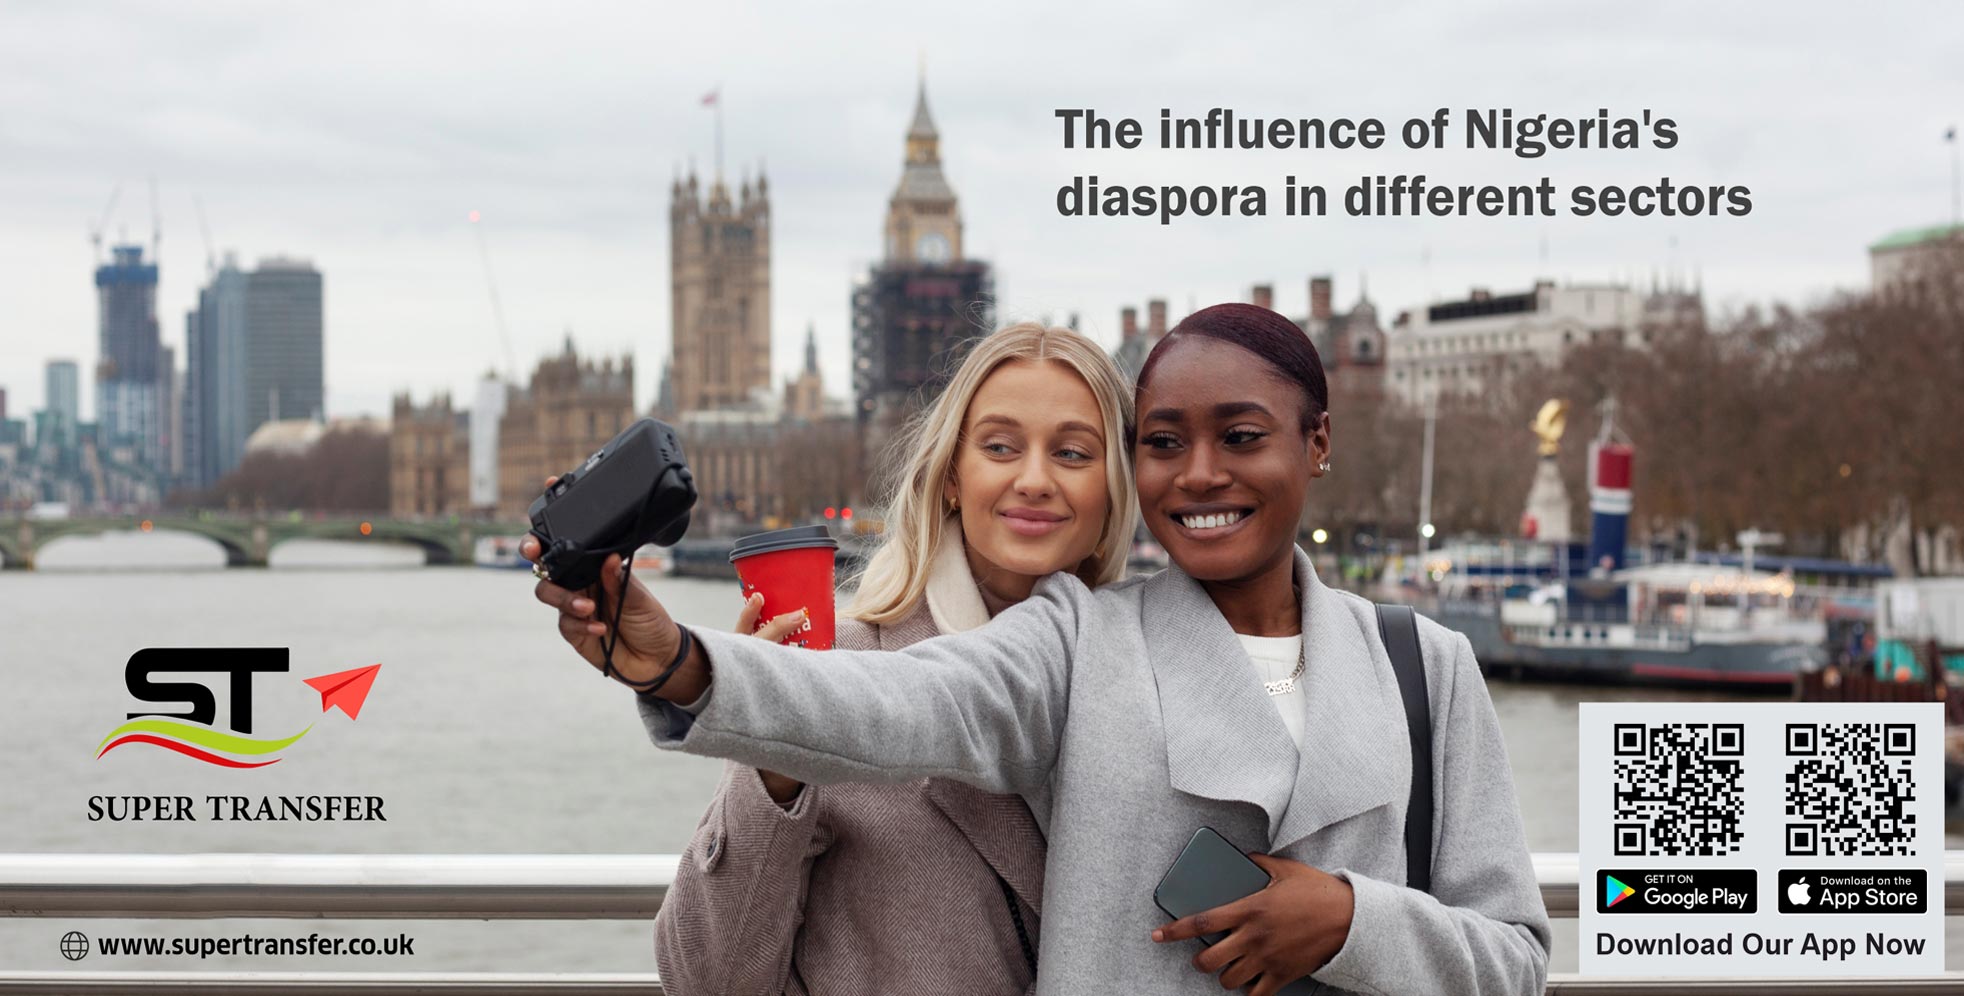 The influence of Nigeria's diaspora in different sectors in the UK